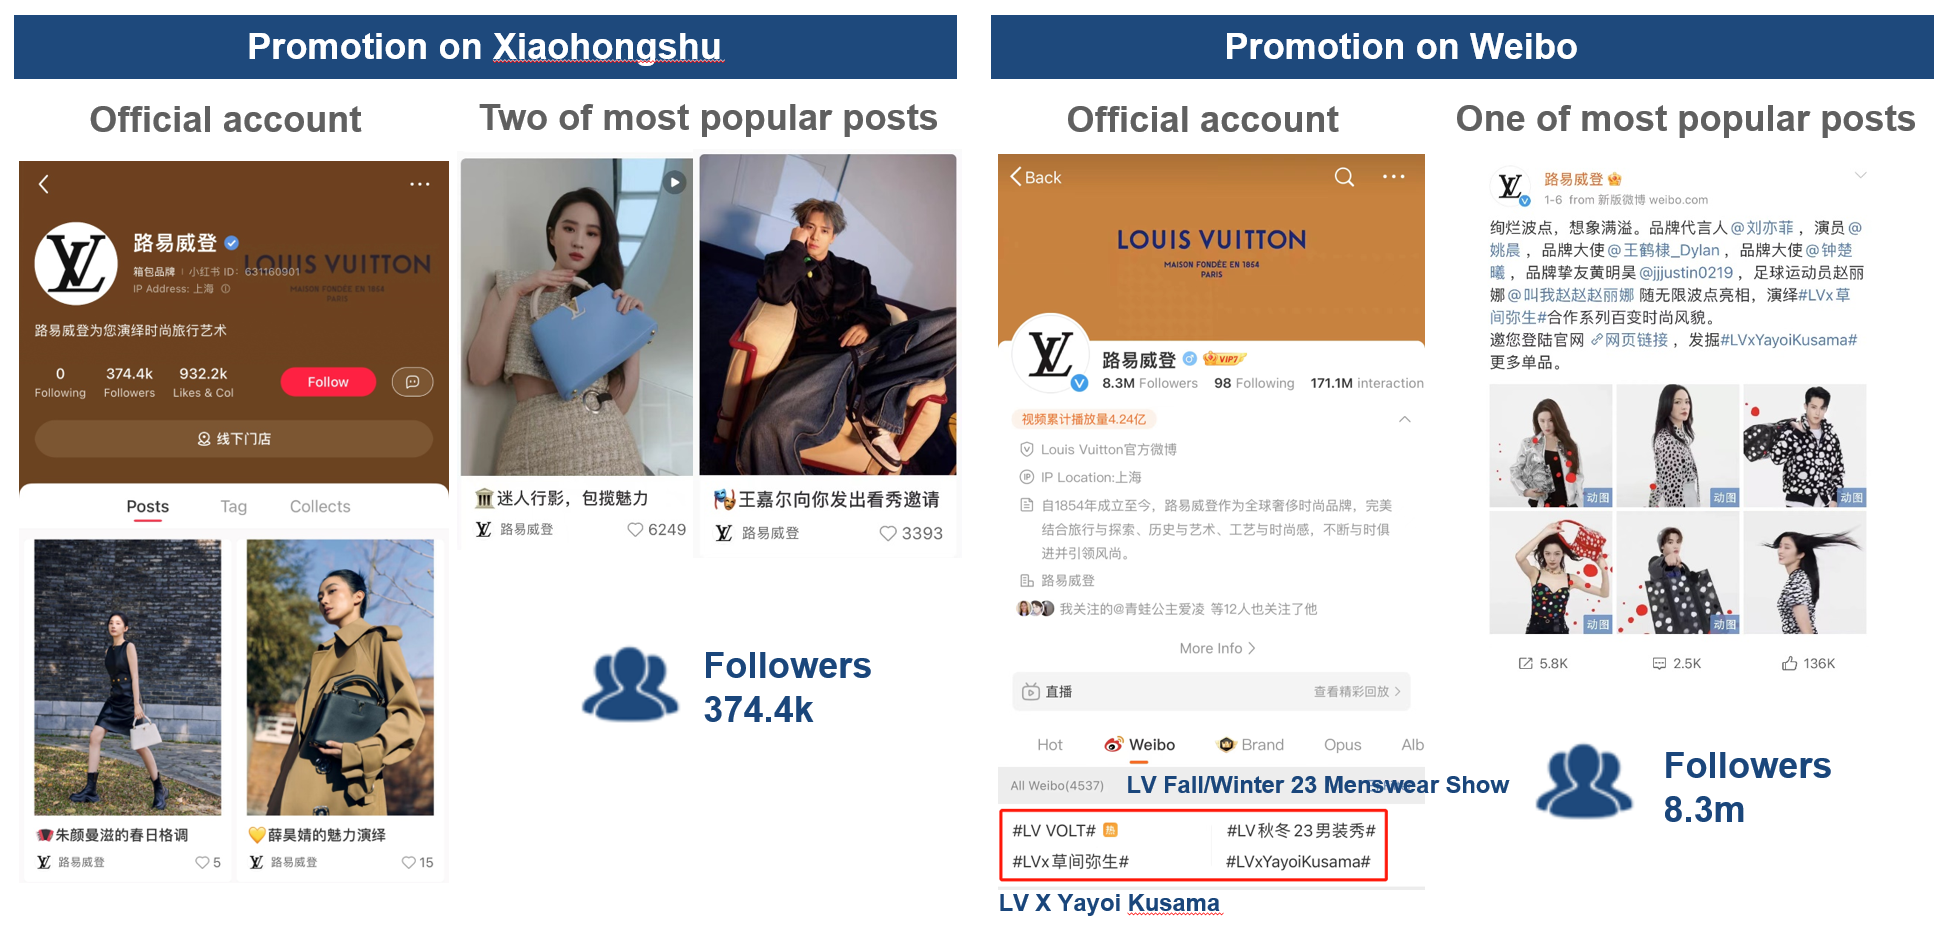 Louis vuitton in china: social media strategy